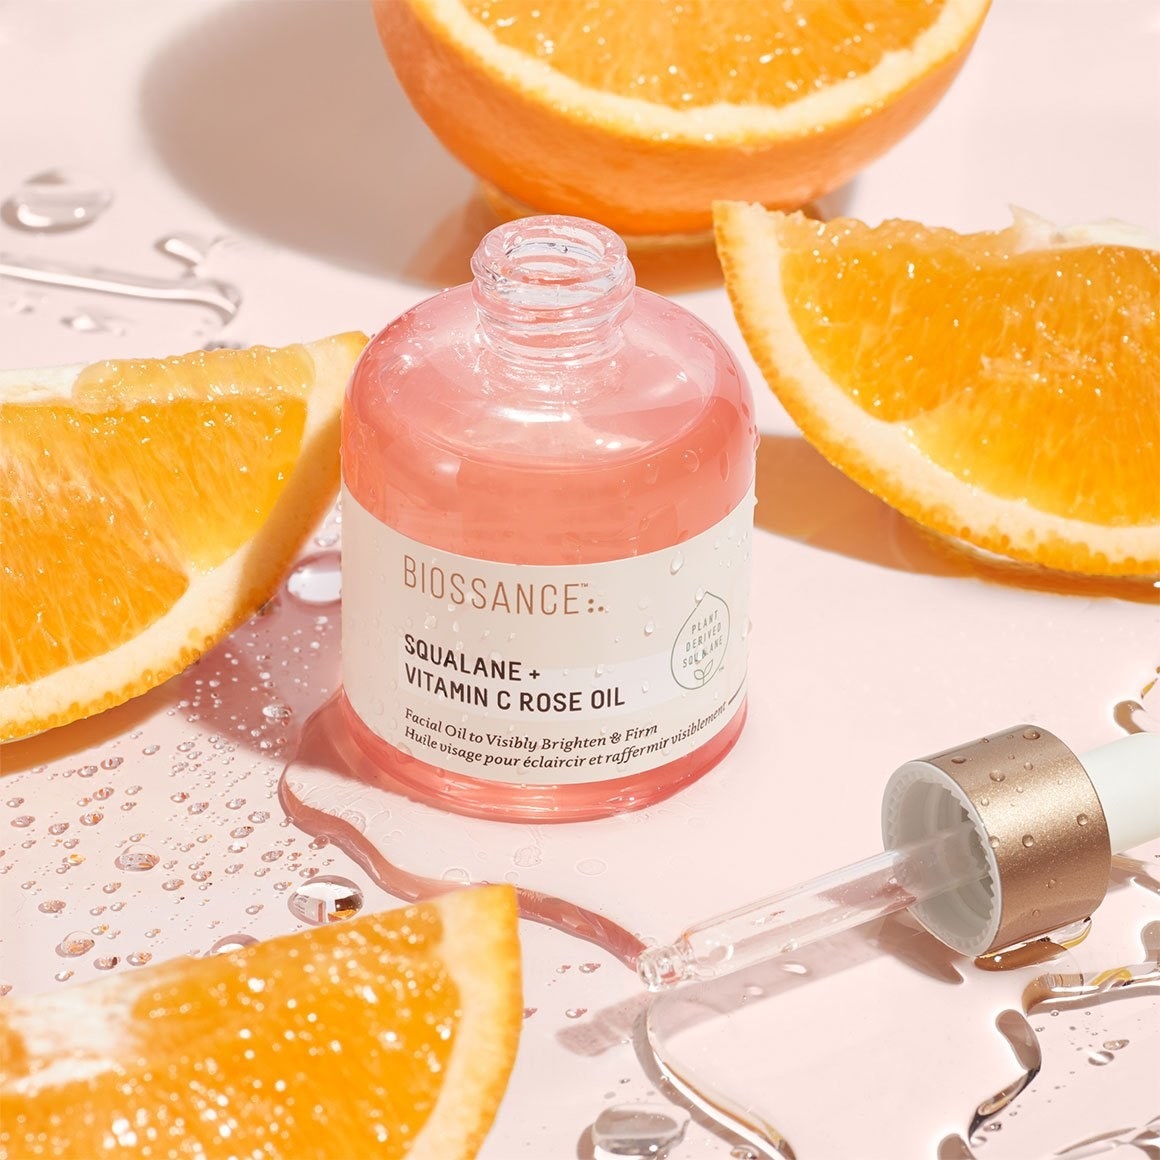 the squalane and vitamin c rose oil surrounded by orange slices